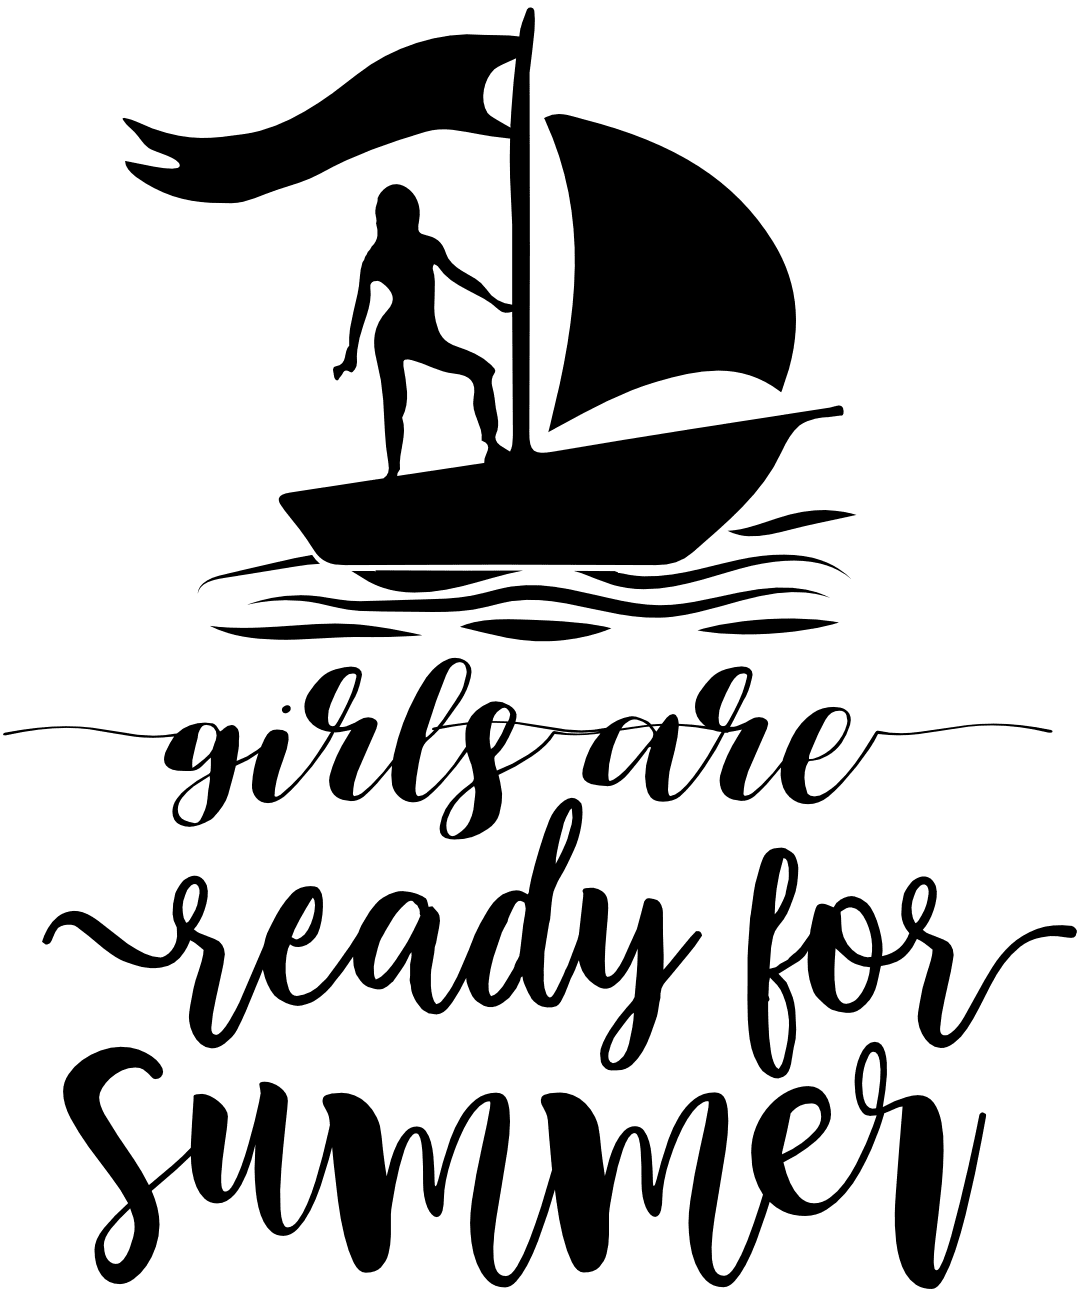 girls-are-ready-for-summer-beach-vacation-free-svg-file-SvgHeart.Com